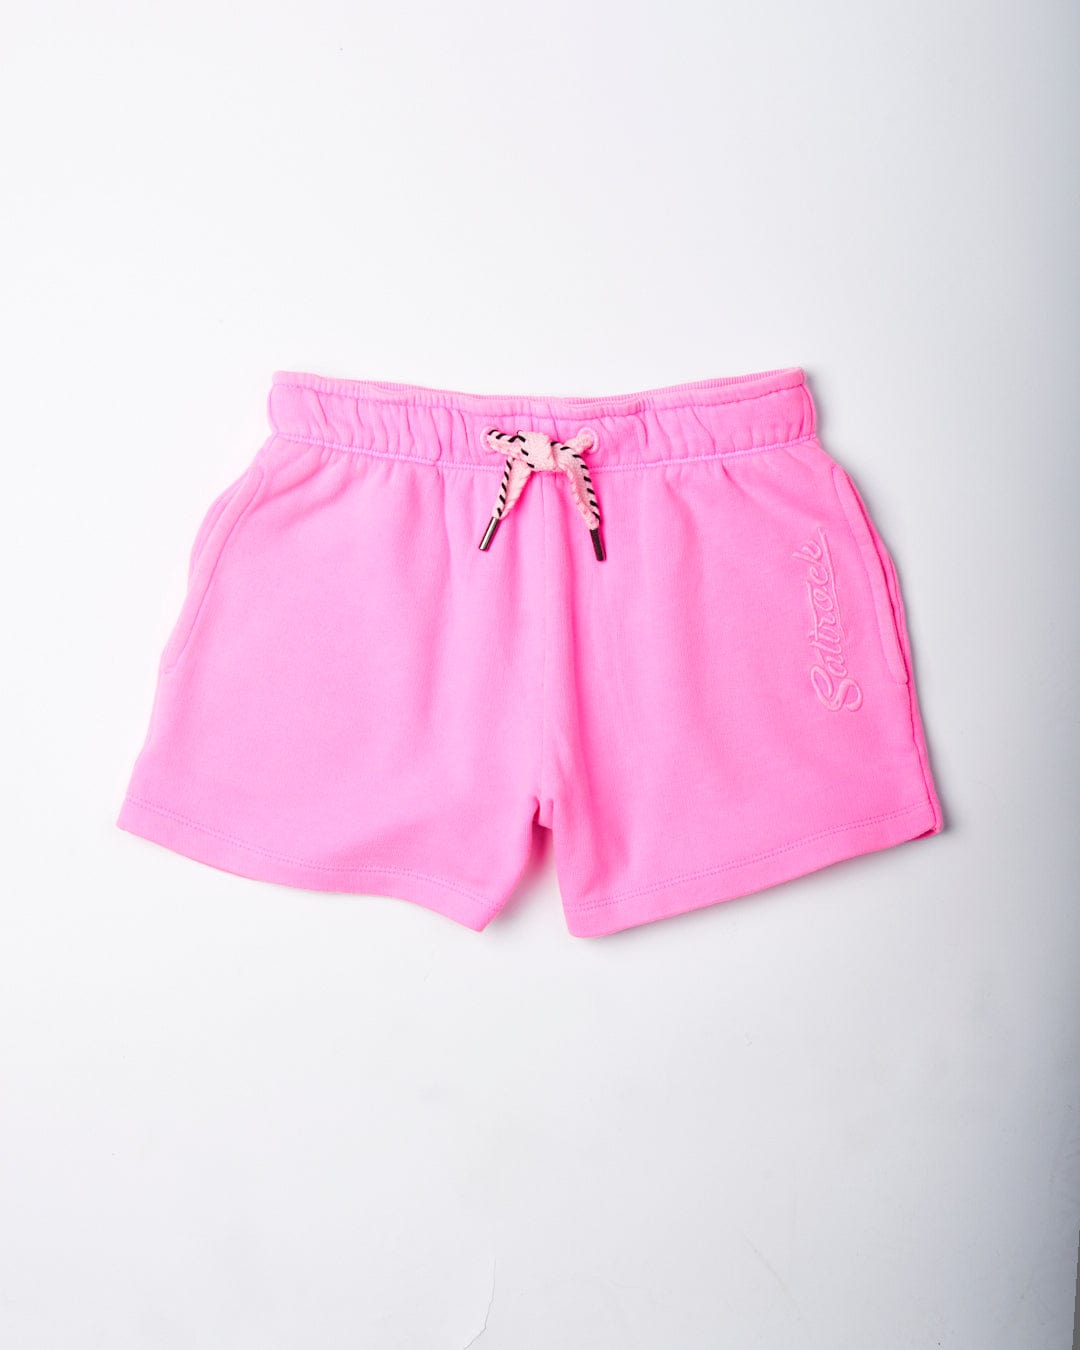 Bright pink Instow Kids Sweat Shorts with an elasticated waist and cursive embroidery on the left leg displayed on a white background by Saltrock.